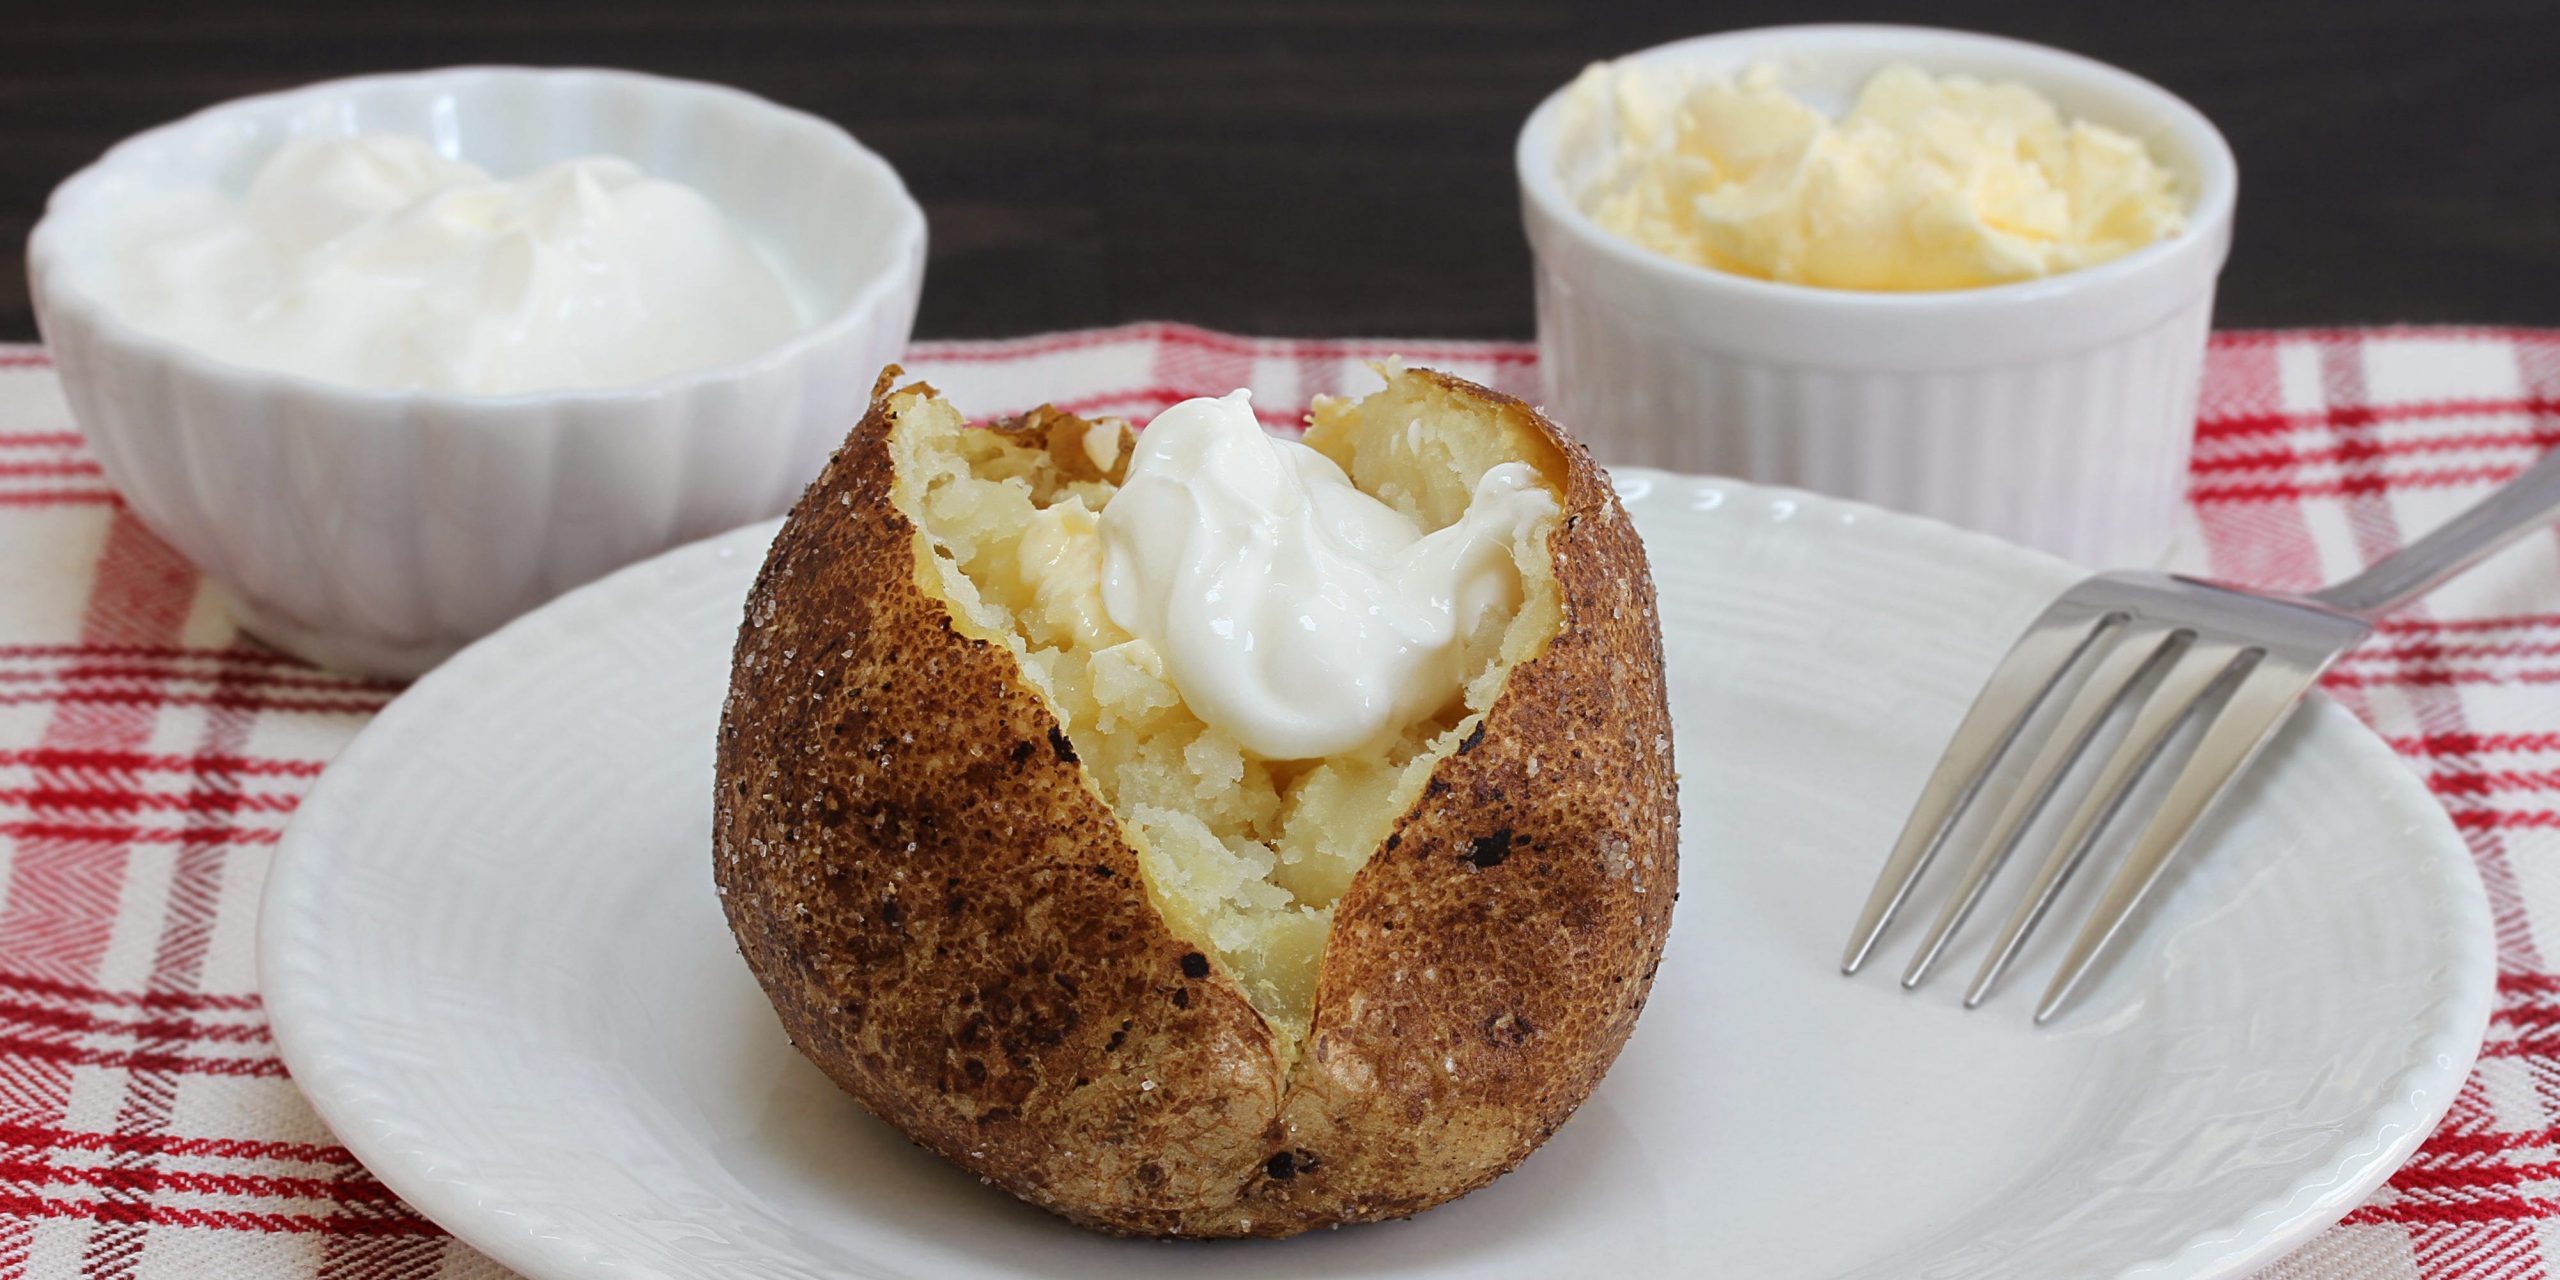 A baked potato topped with sour cream on a place with a fork